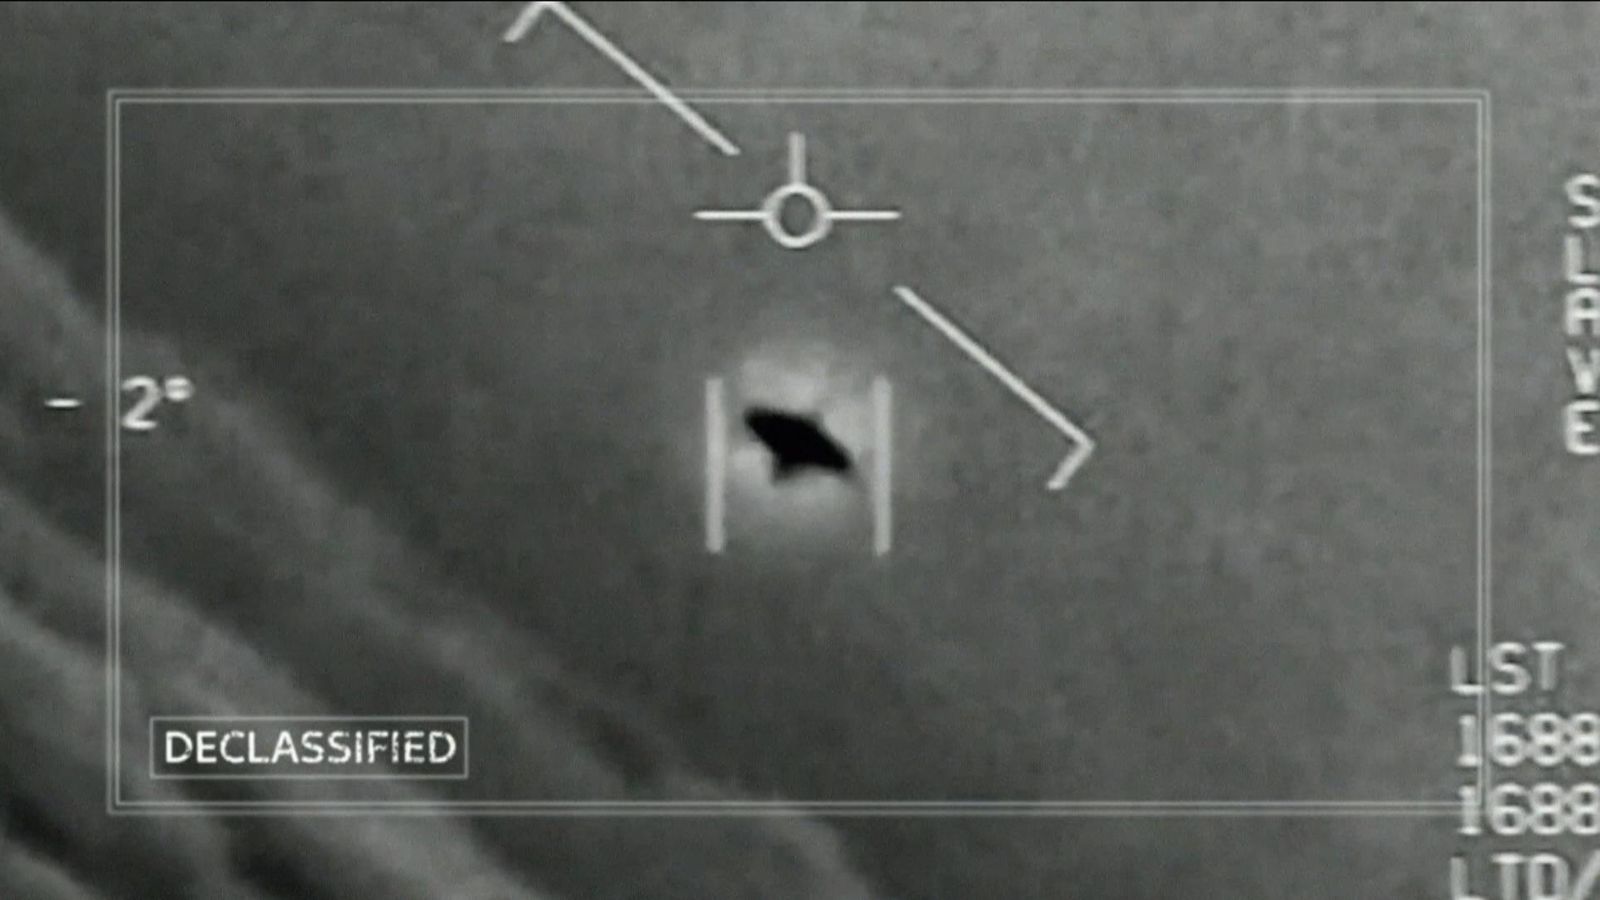 Pentagon UFO report: Not enough evidence to rule if extra-terrestrial life exists or not, officials say